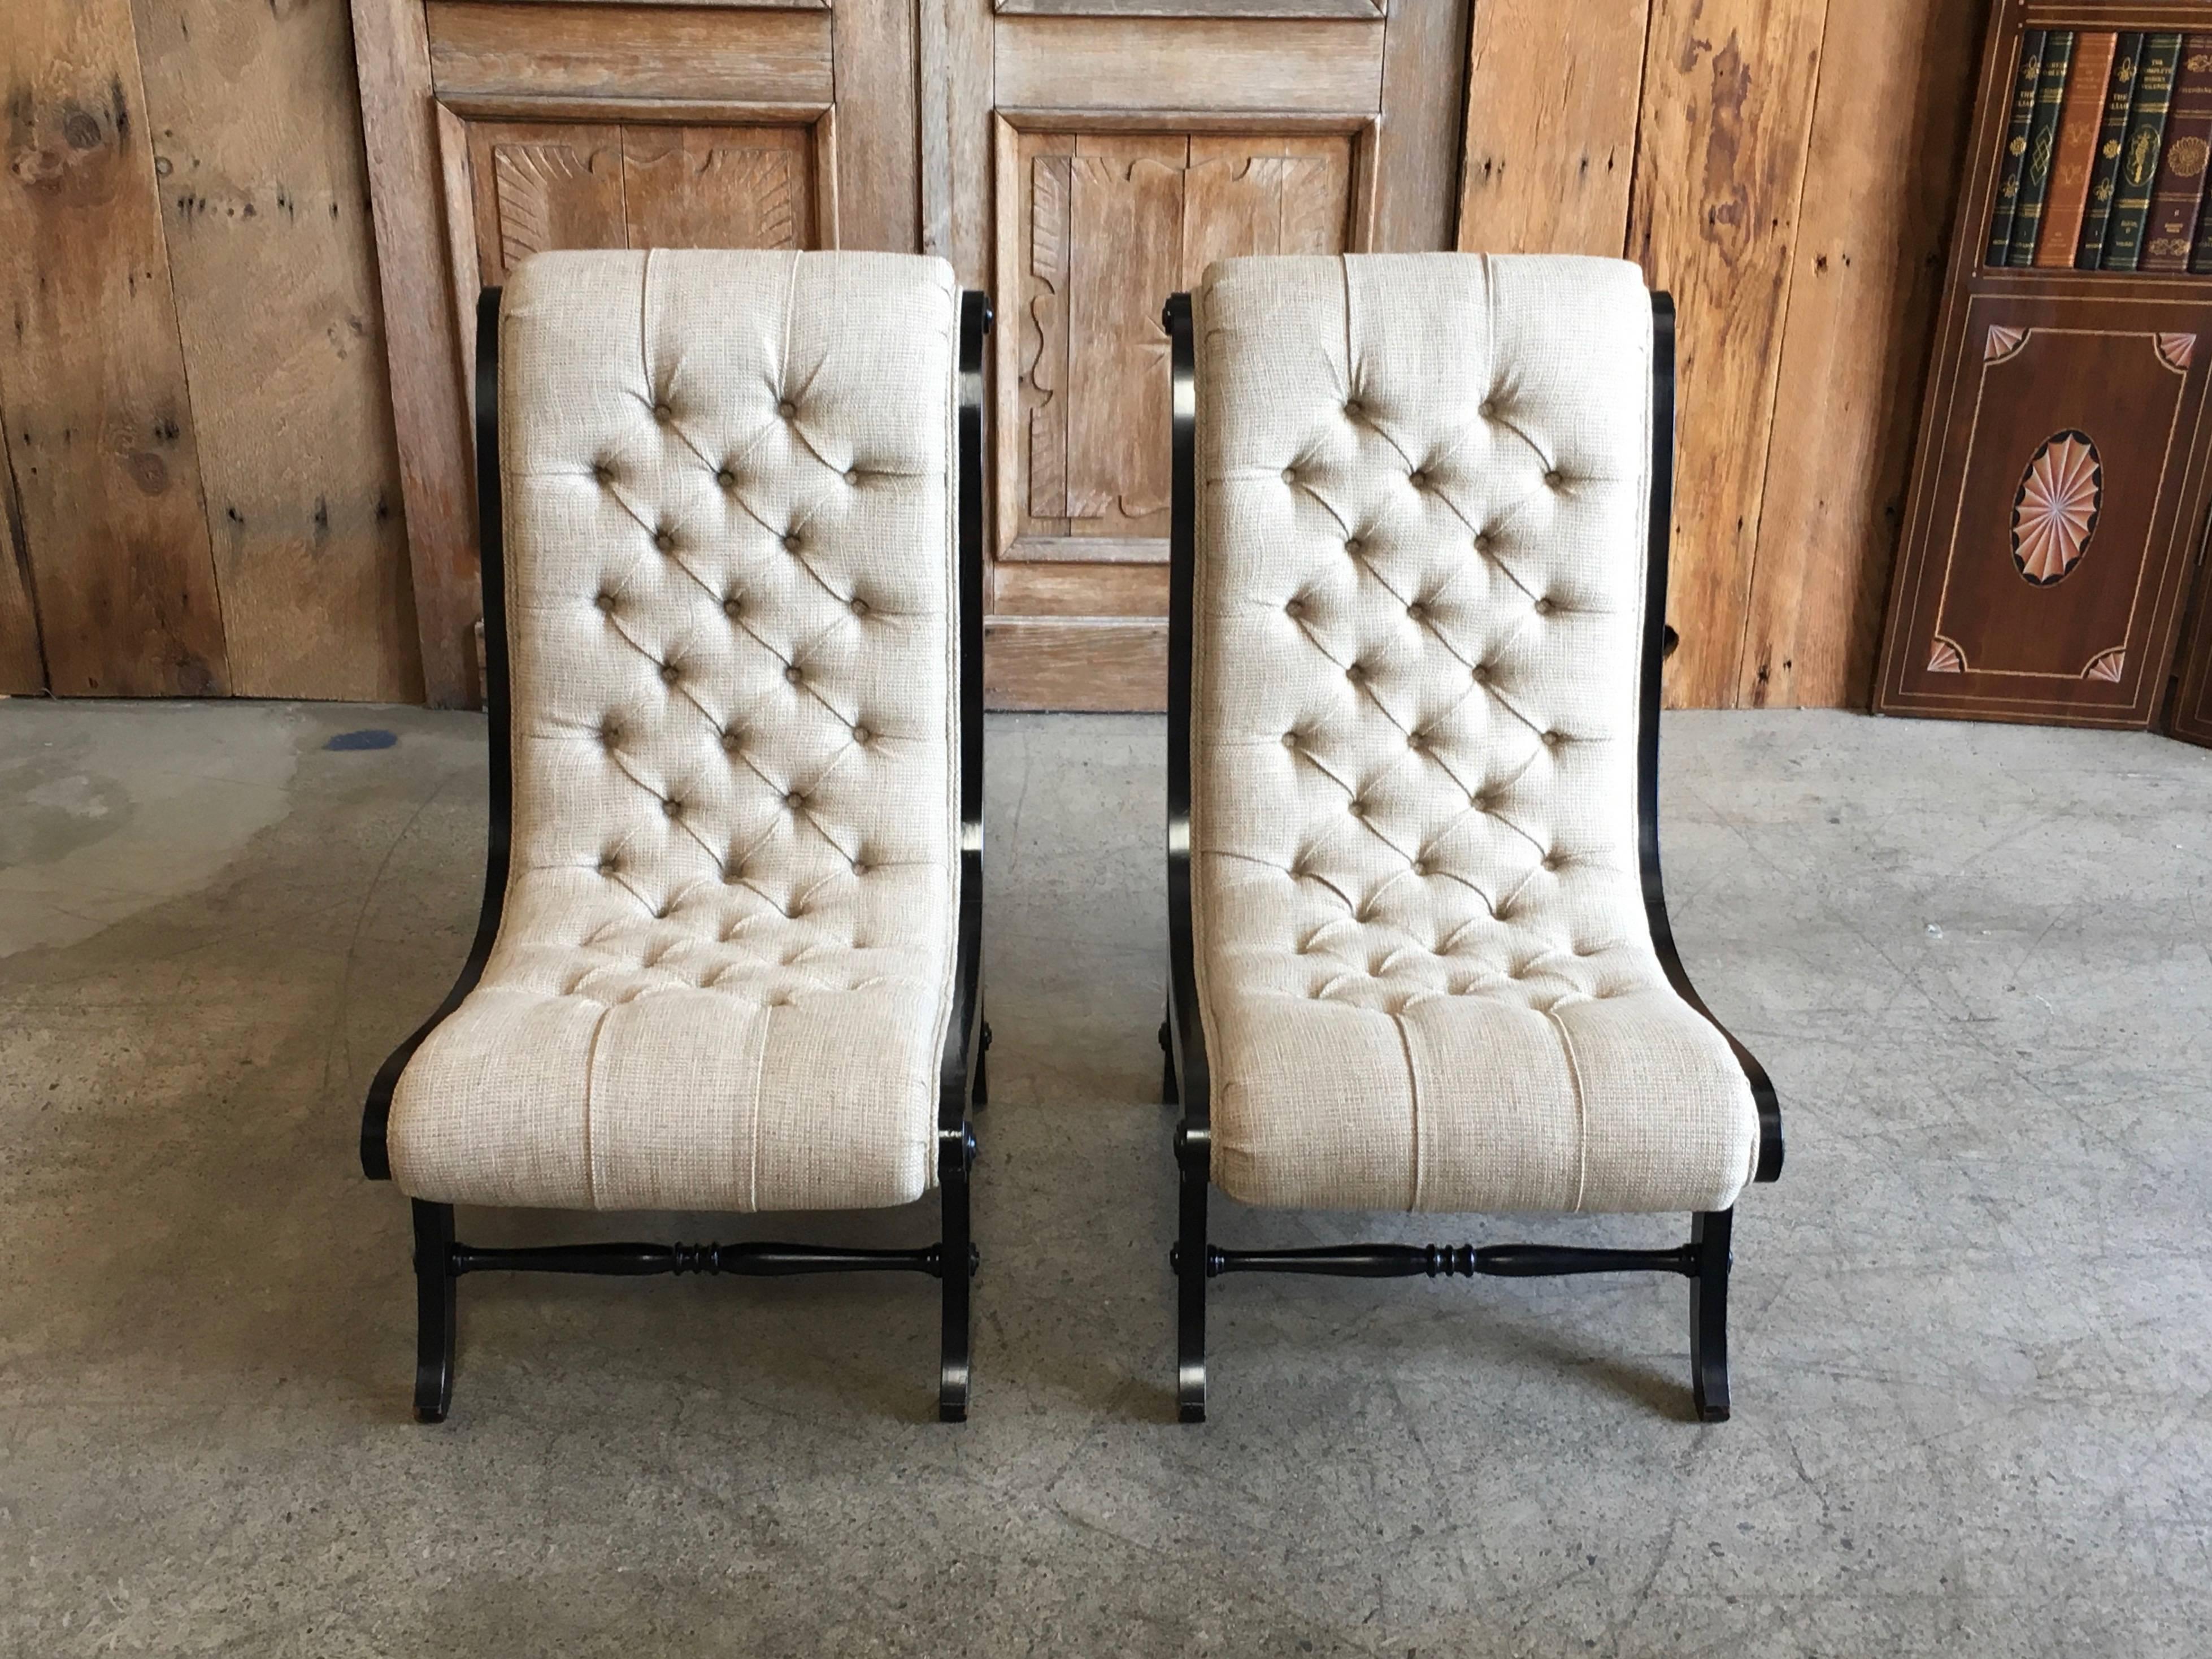 20th Century Tufted Slipper Chairs